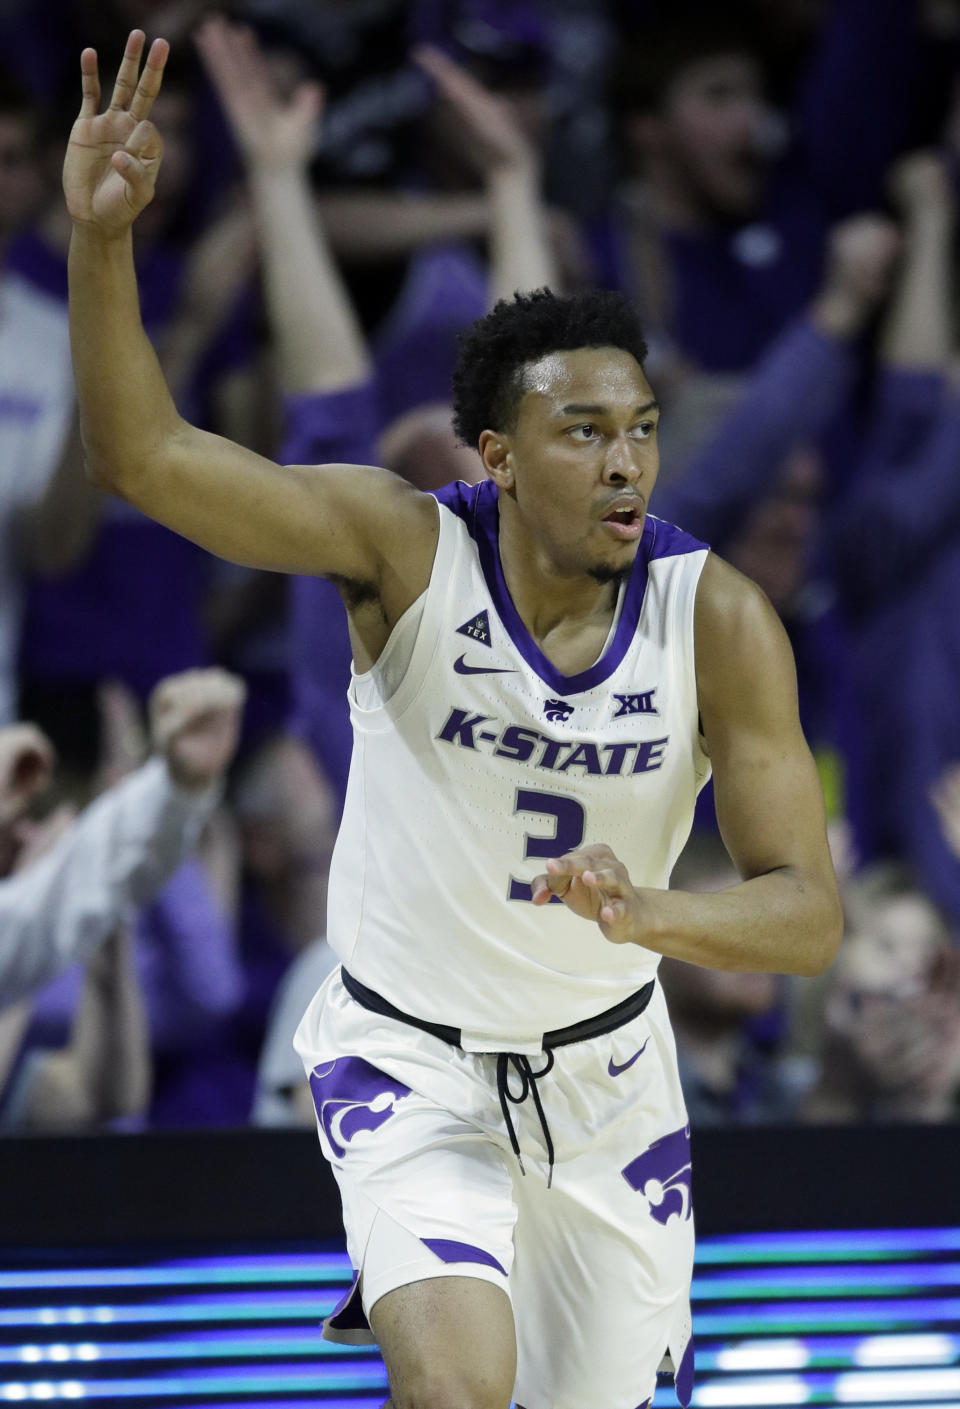 Kansas State guard Kamau Stokes (3) celebrates a three-point basket during the first half of an NCAA college basketball game against Oklahoma in Manhattan, Kan., Saturday, March 9, 2019. (AP Photo/Orlin Wagner)